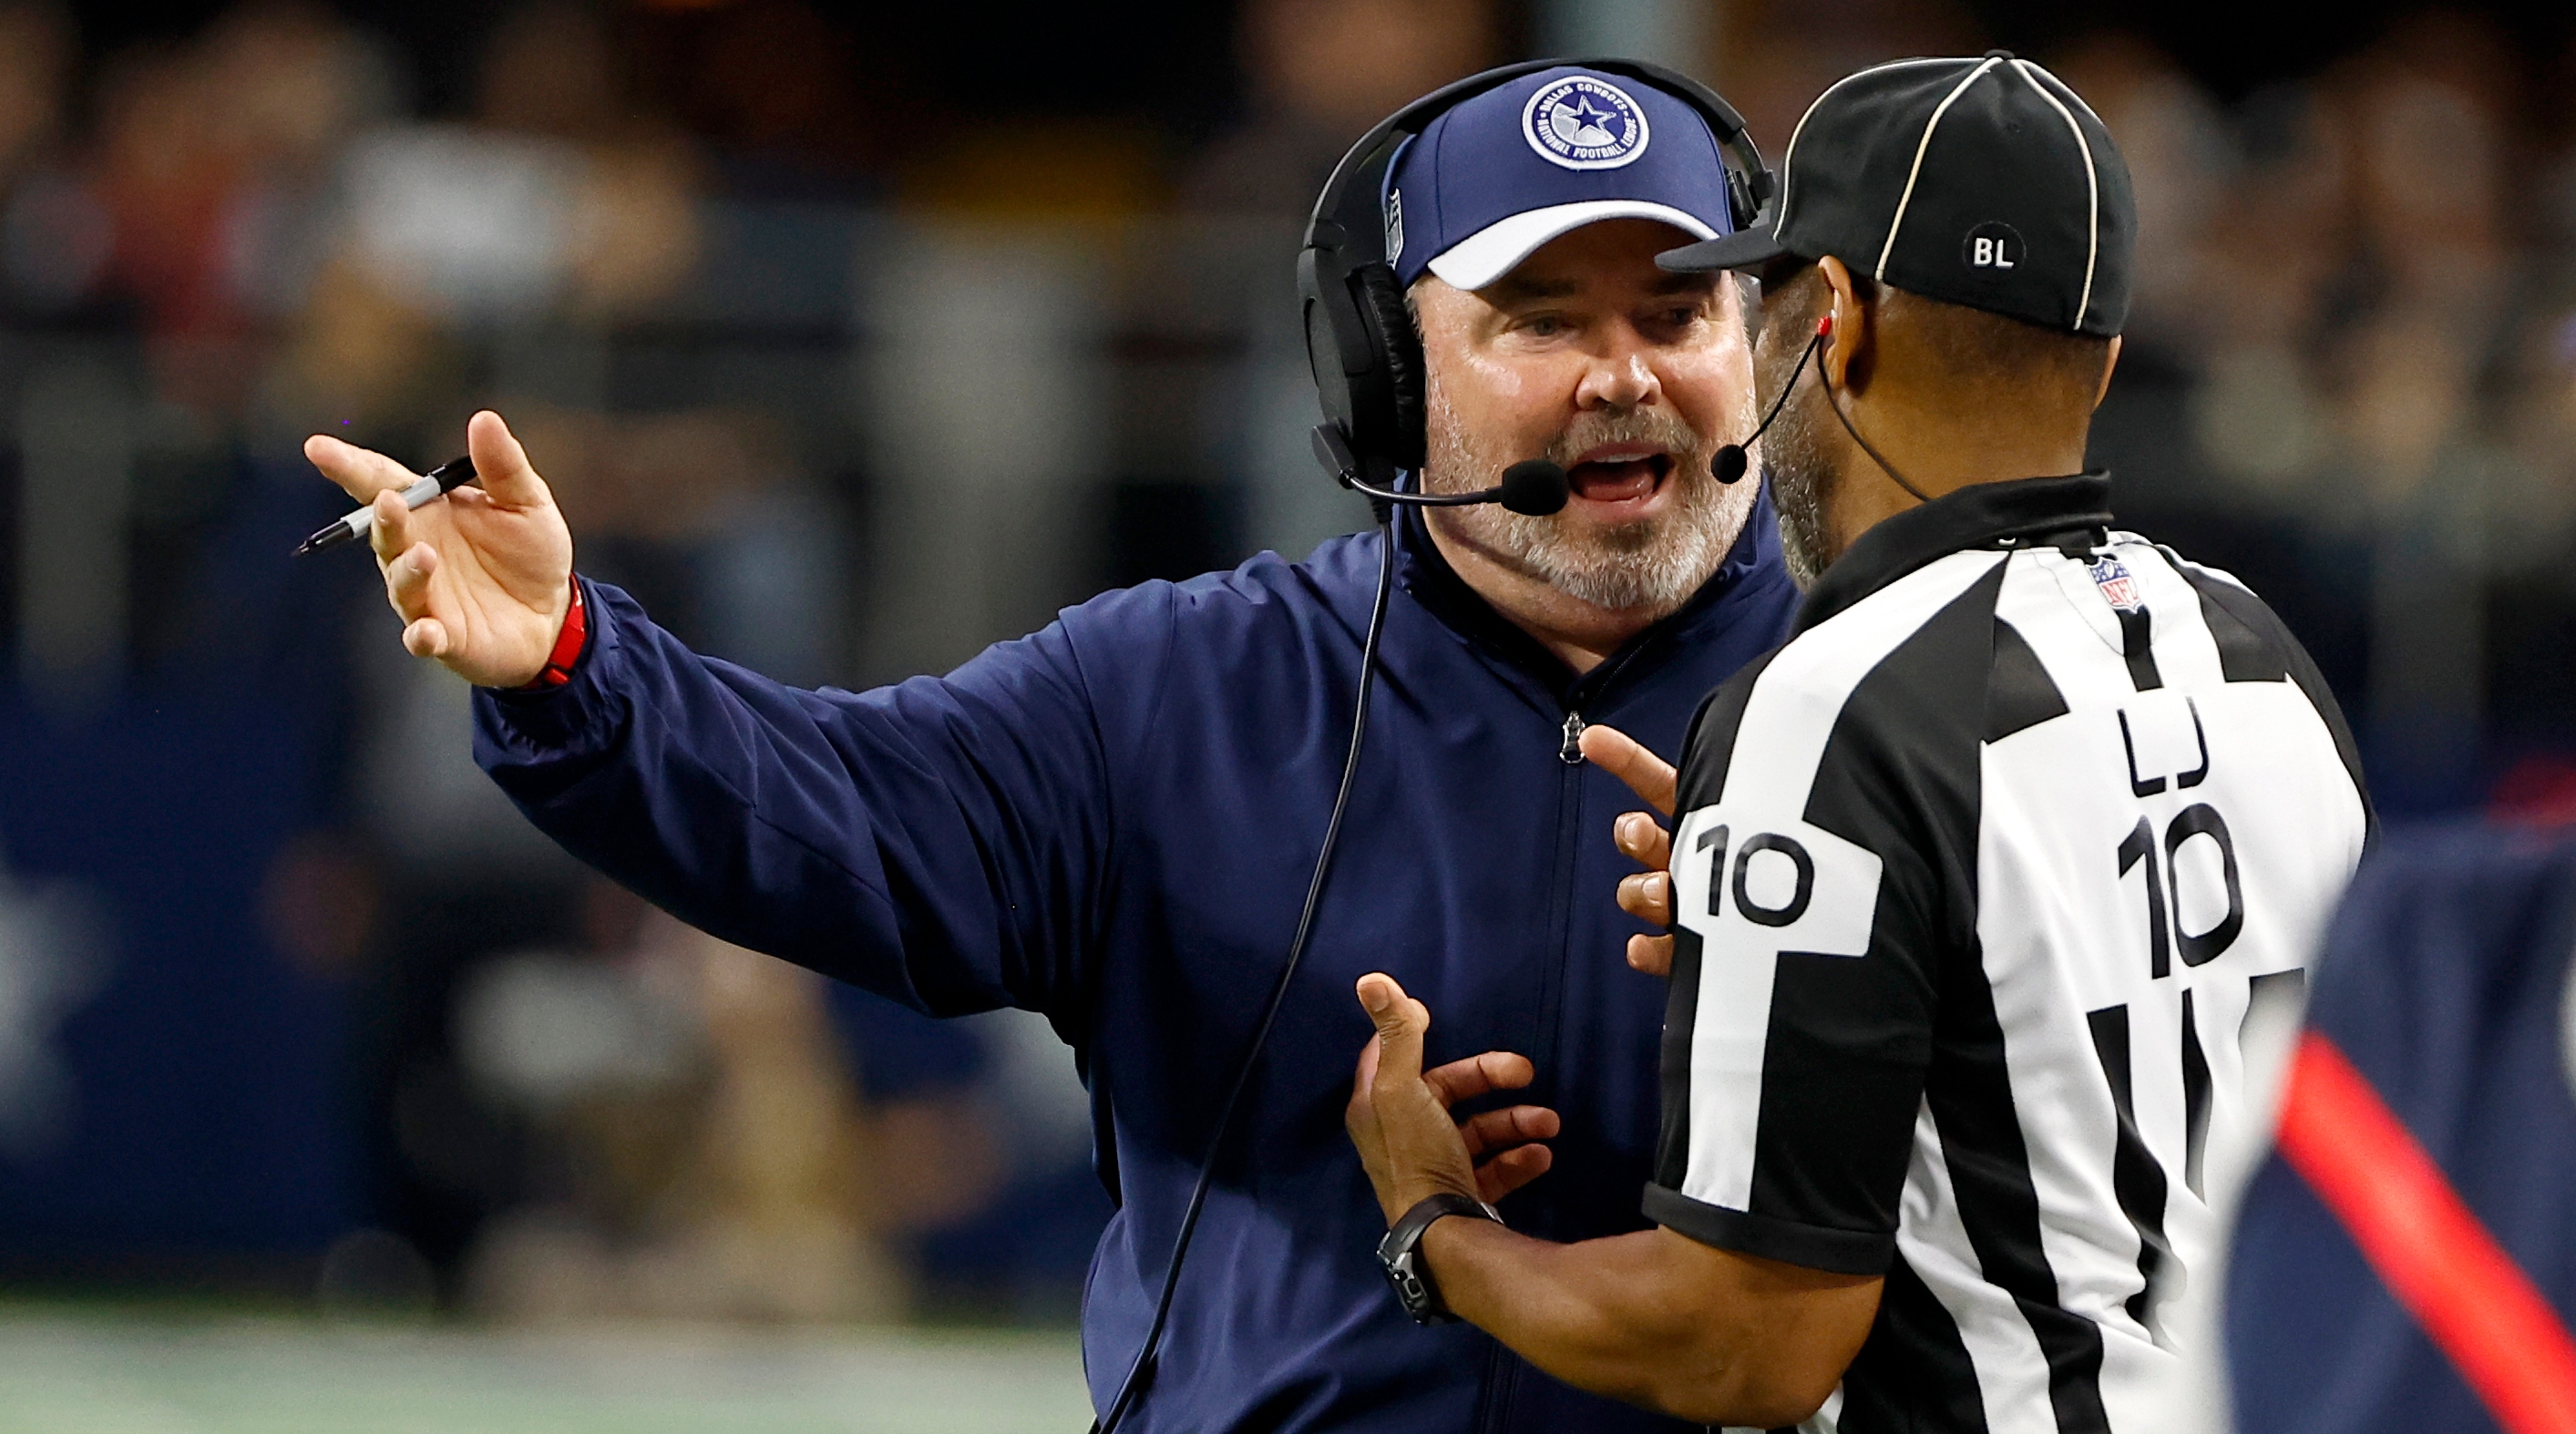 Cowboys coach Mike McCarthy, left, talks to line judge Julian Mapp (10) after a penalty was called against the Cowboys.